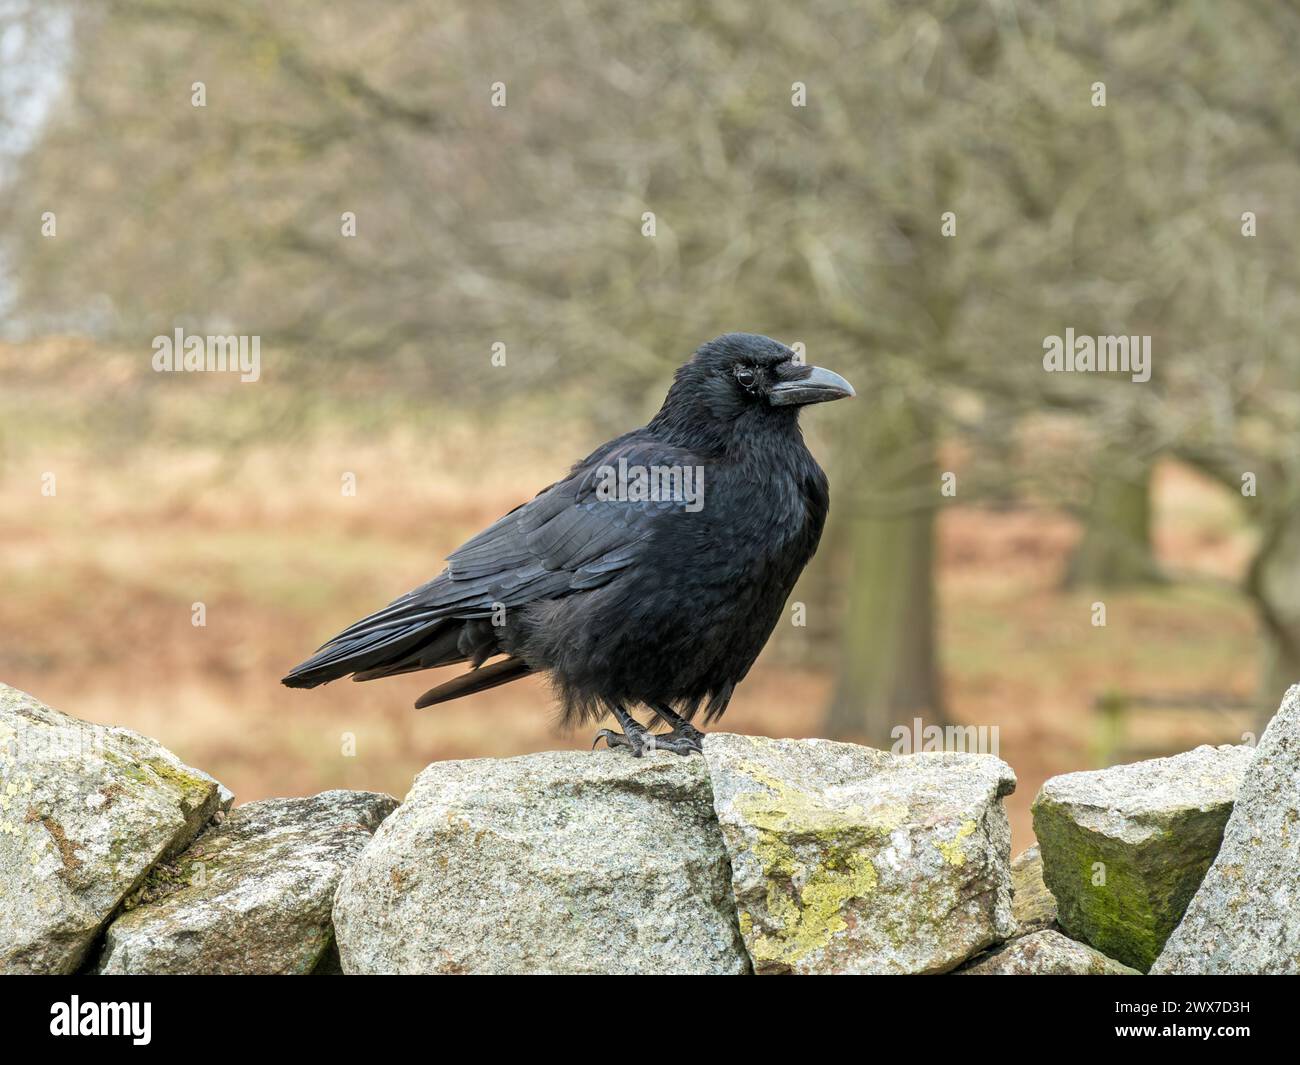 One black Common Raven bird (Corvus Corax) also known as a Northern Raven standing on stone wall, England, UK Stock Photo